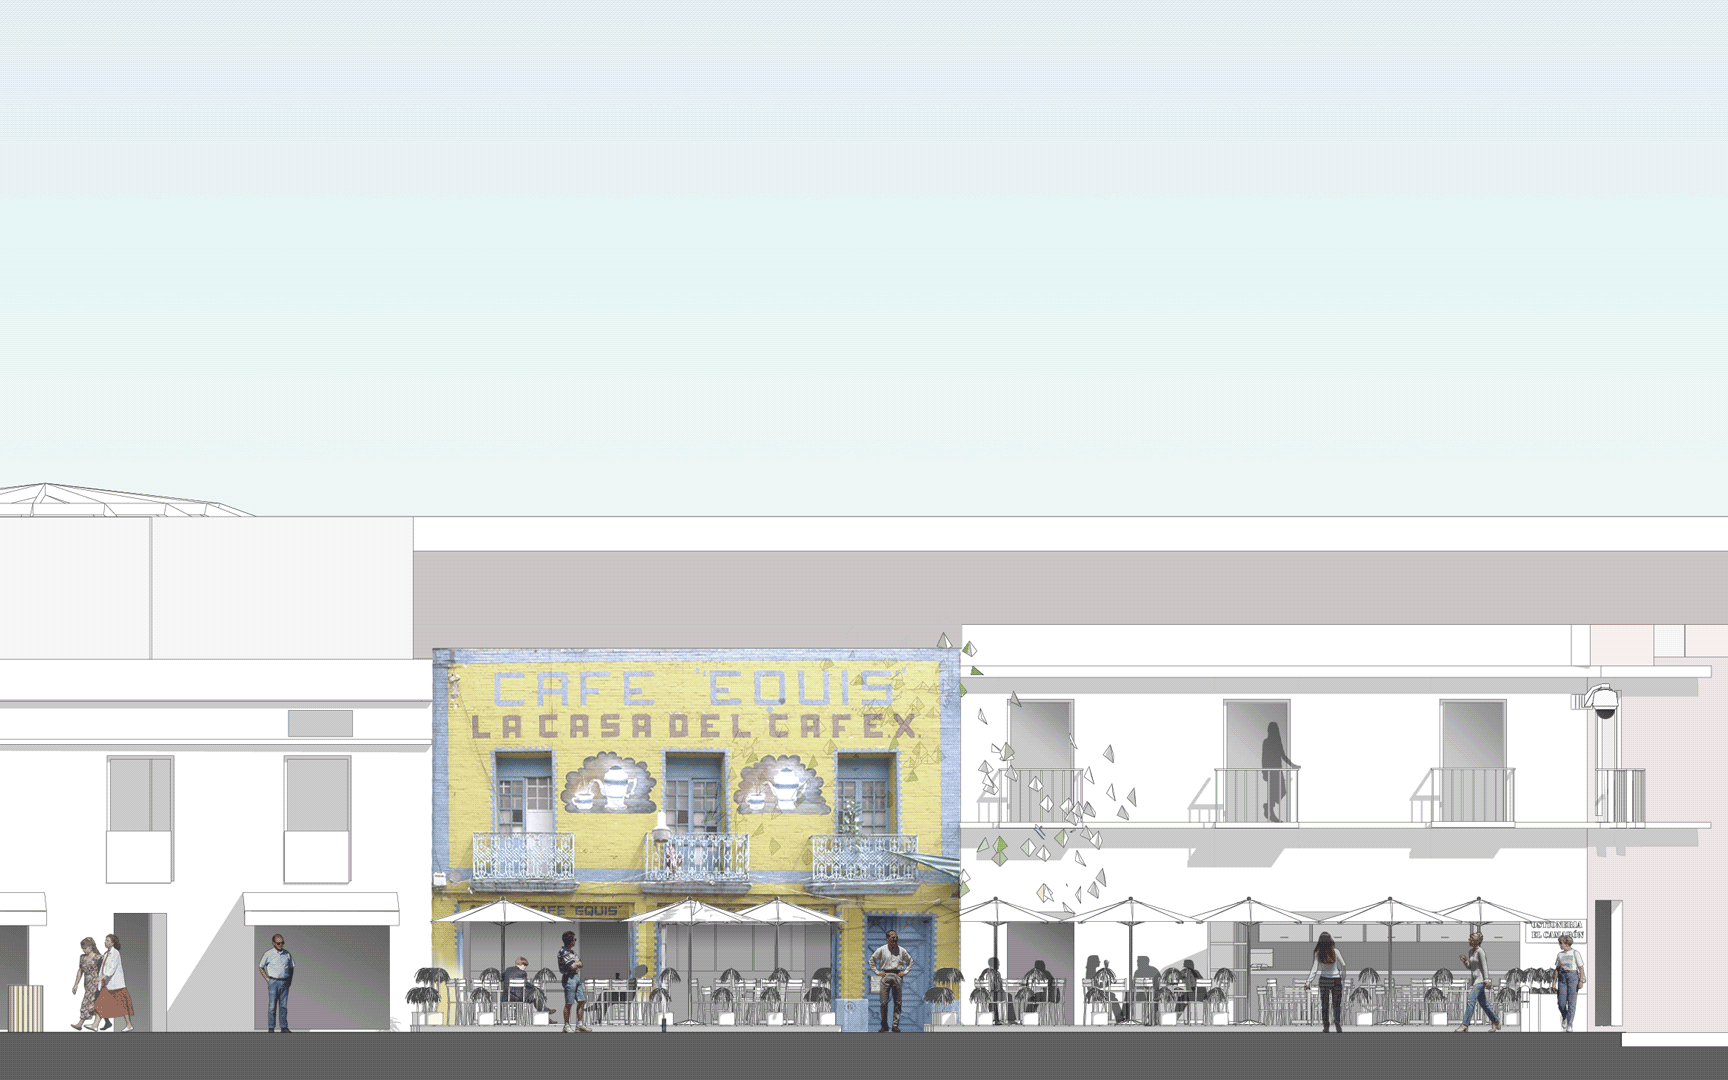 Proposed street elevations of Cafe Equis and Mariscos cantina, Calle Roldan, La Merced, Mexico City